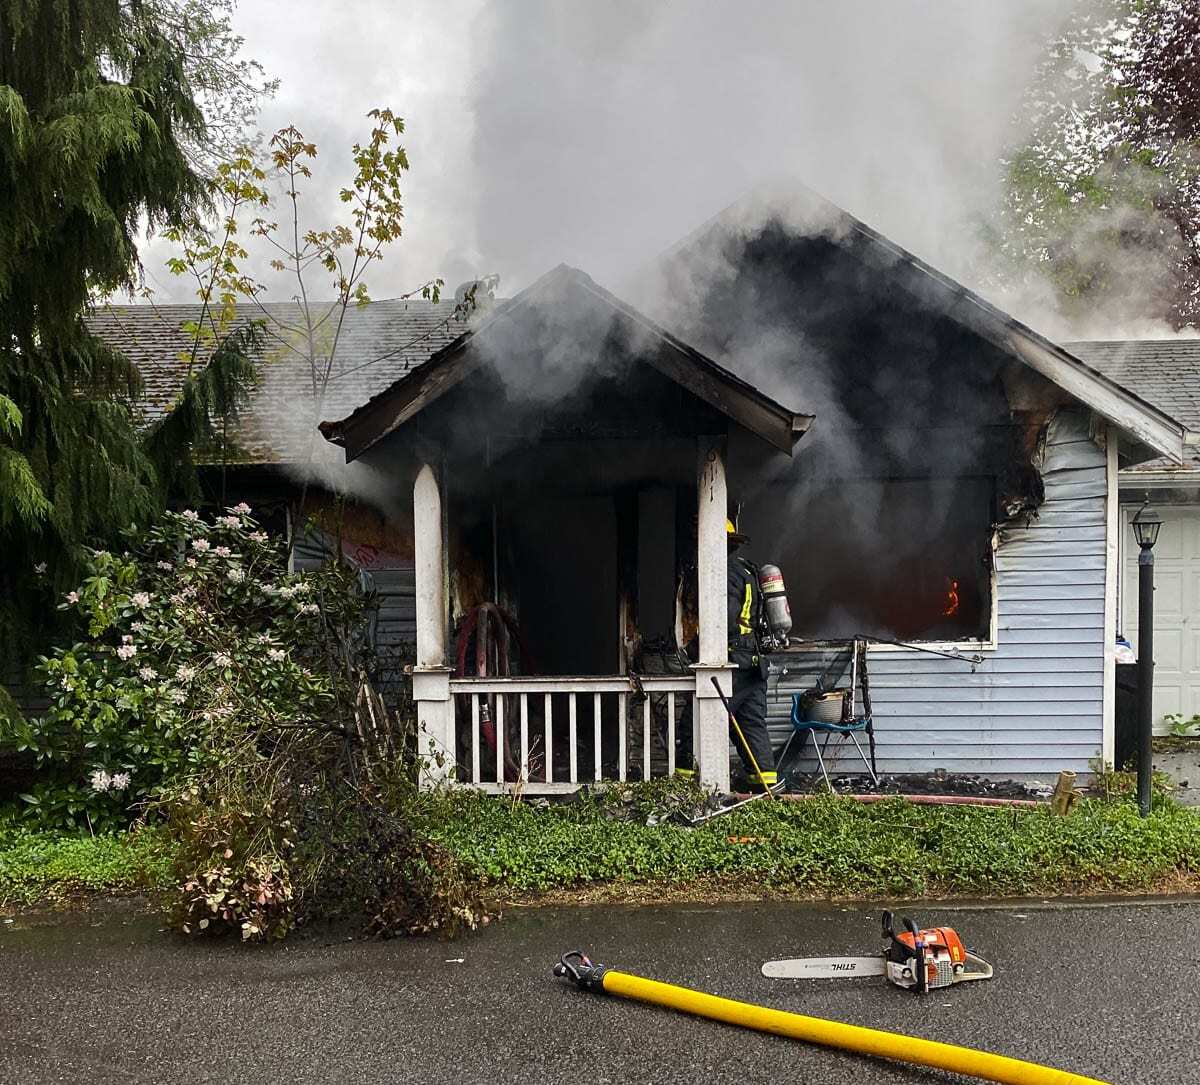 This one-story home in Camas is considered to be a total loss after a fire Saturday evening. Photo courtesy of Camas-Washougal Fire Department